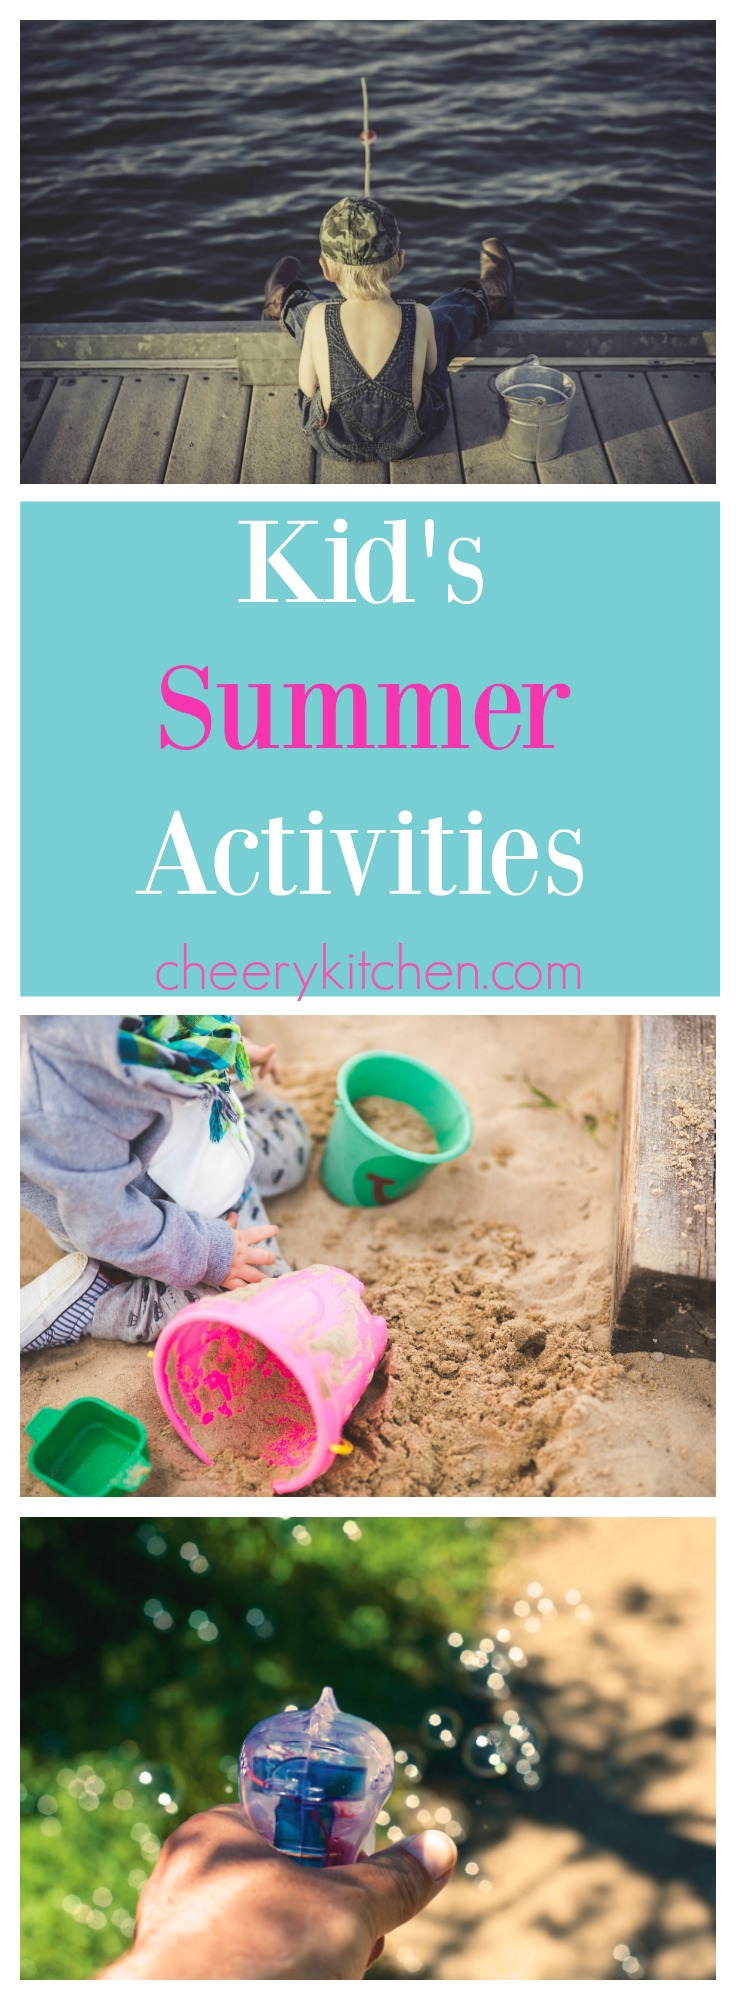 School's out and now what do you do with your kids all summer? Here are the BEST kid's summer activities to beat the boredom with things at home - FREE!